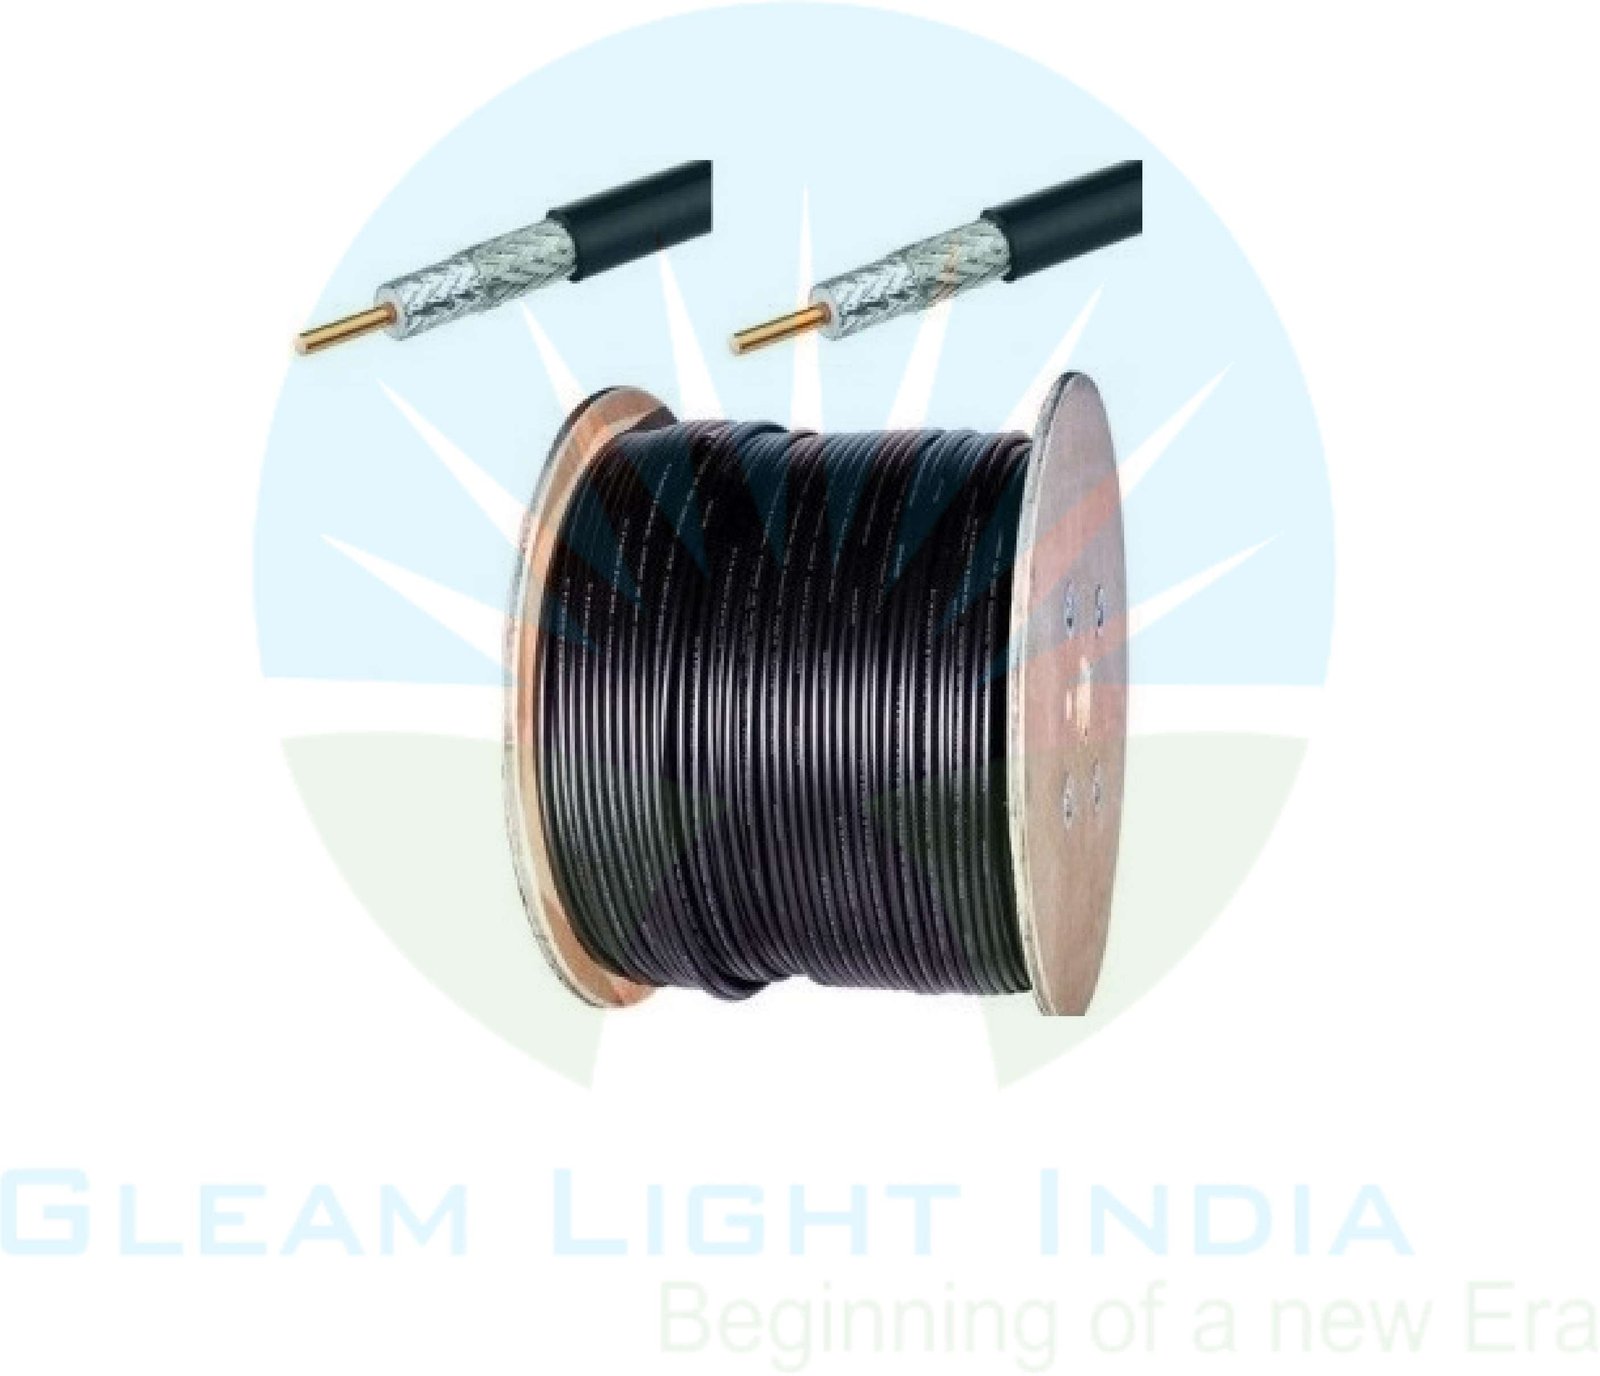 438_LMR-300_CABLE.jpg